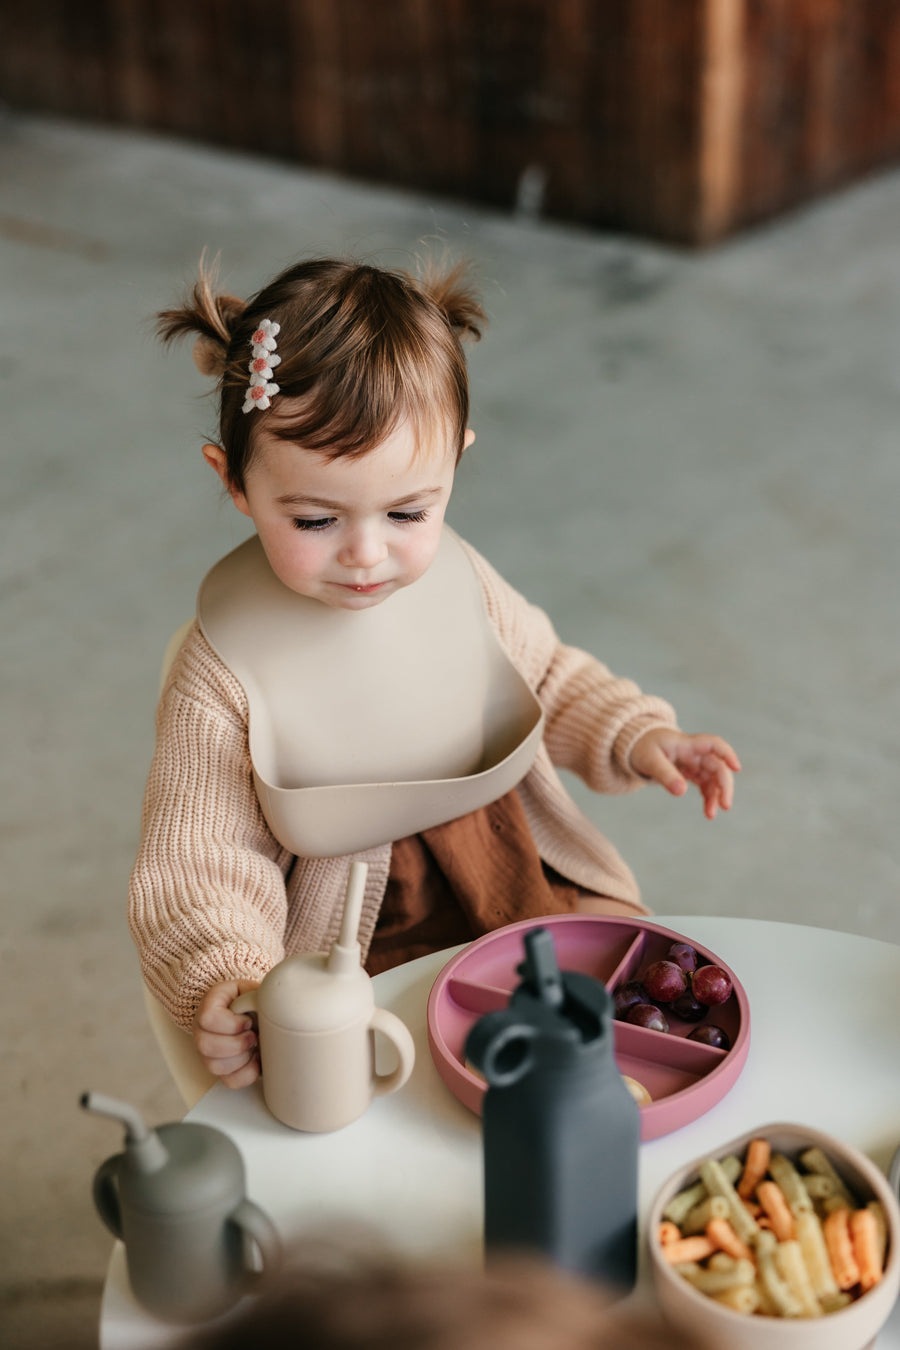 Desert Rose Silicone Toddler Cup